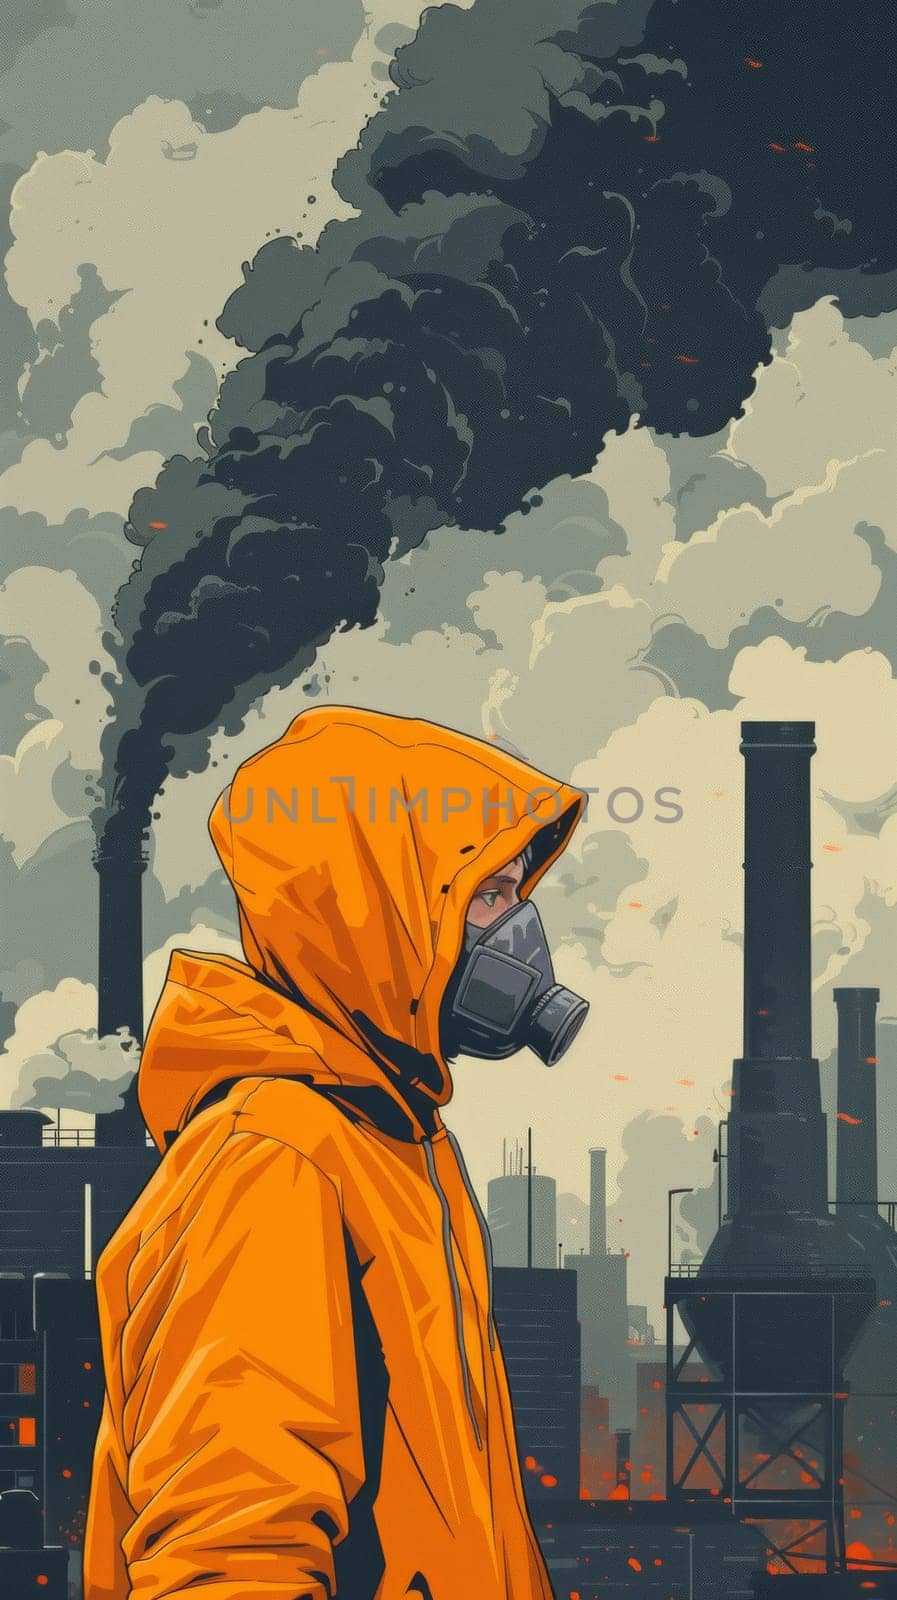 A man in a yellow jacket with an orange gas mask standing next to industrial buildings